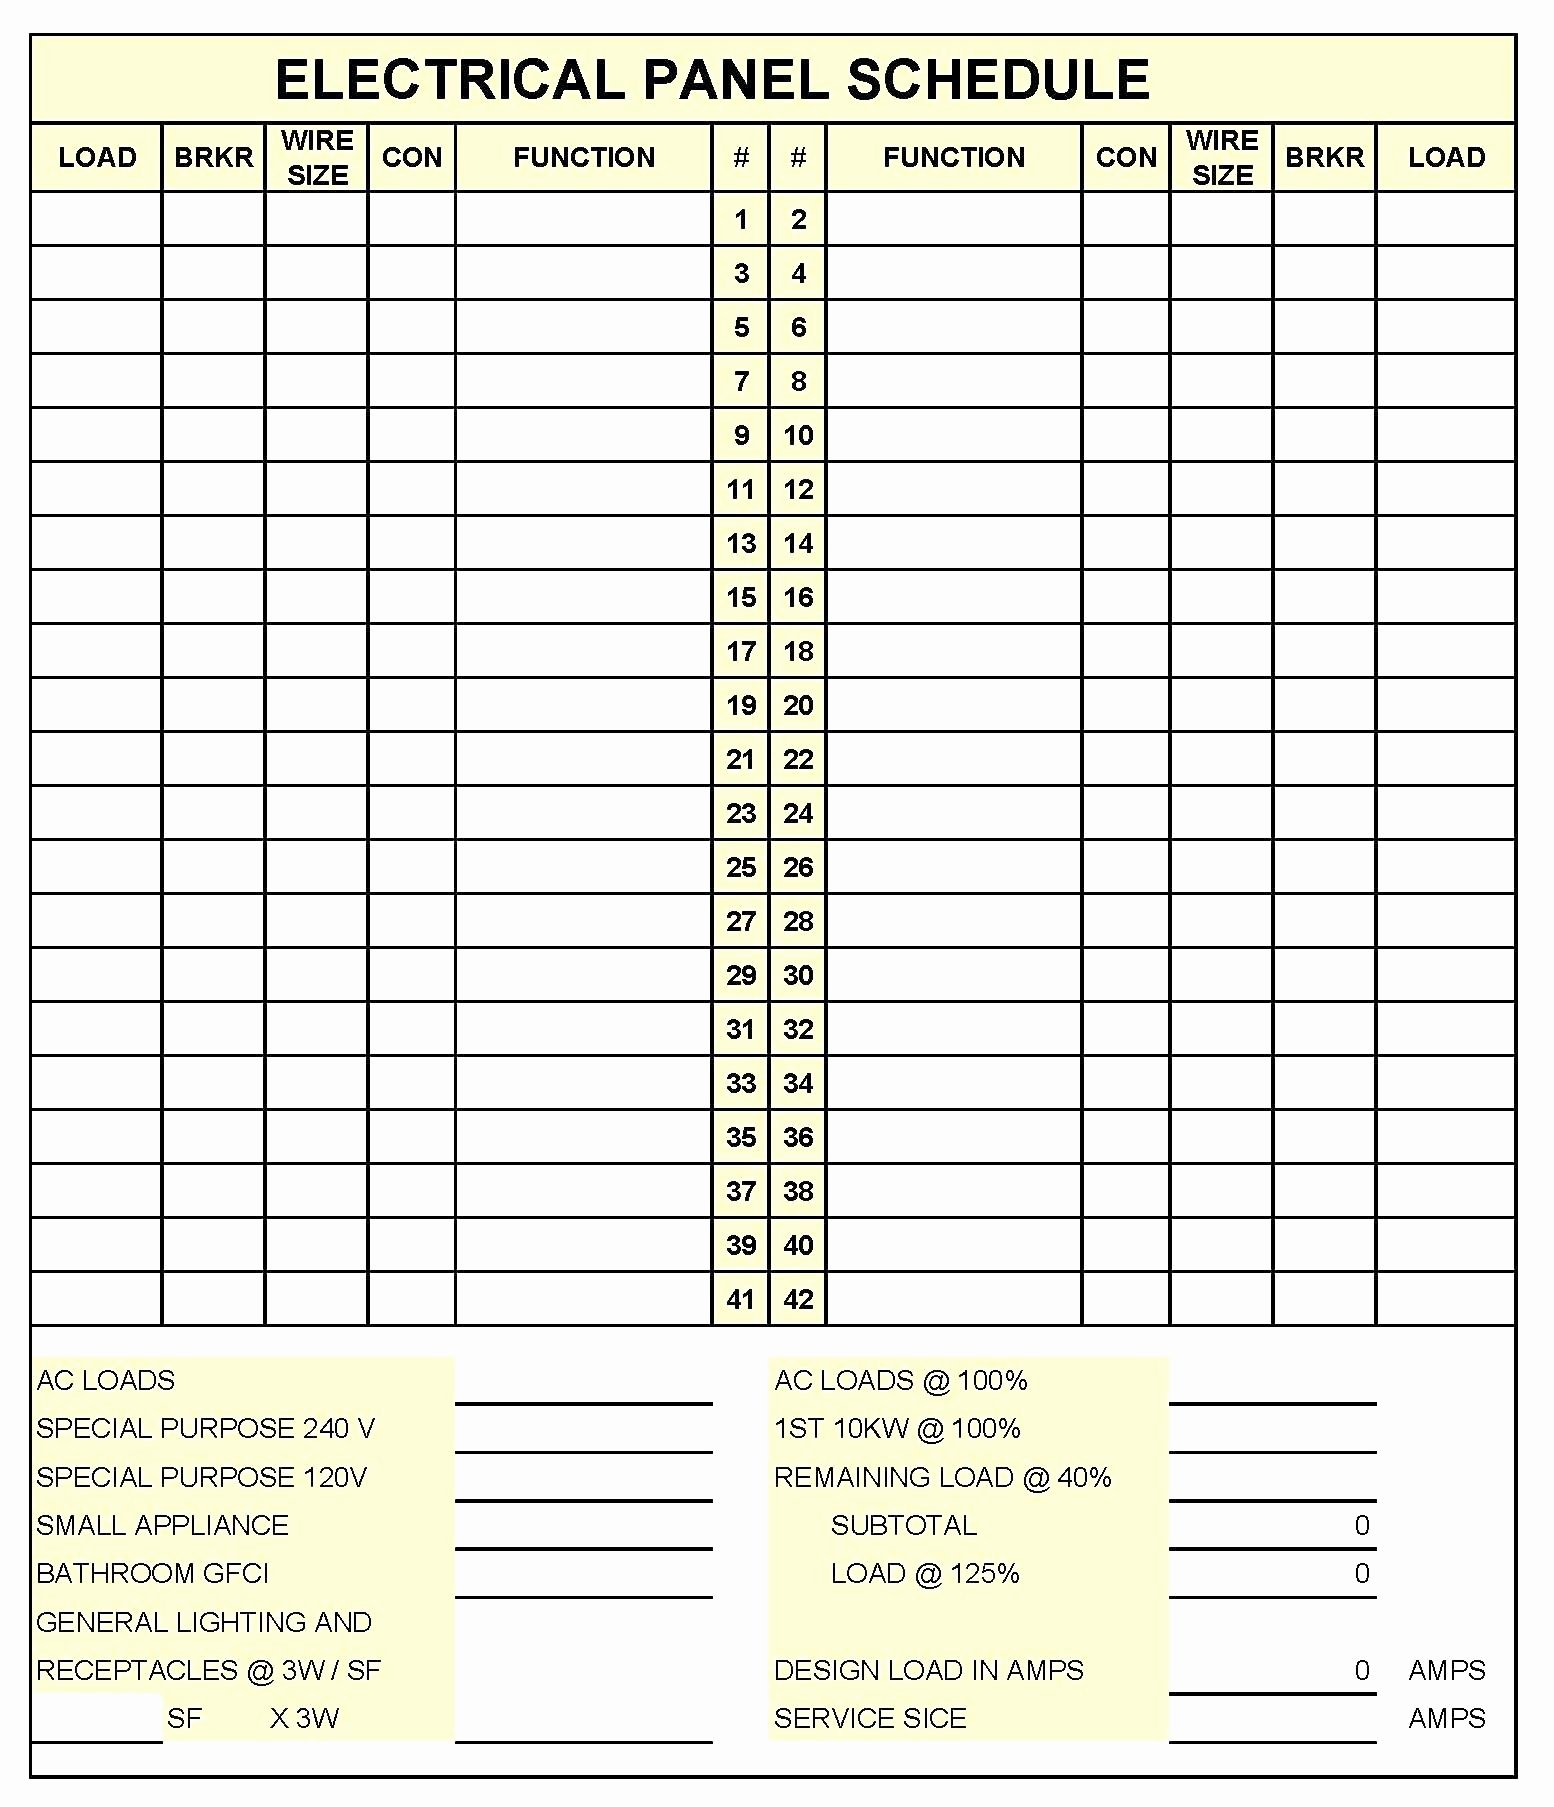 Electrical Panel Schedule Template Best Of Electrical Panel Schedule Template Excel Glendale